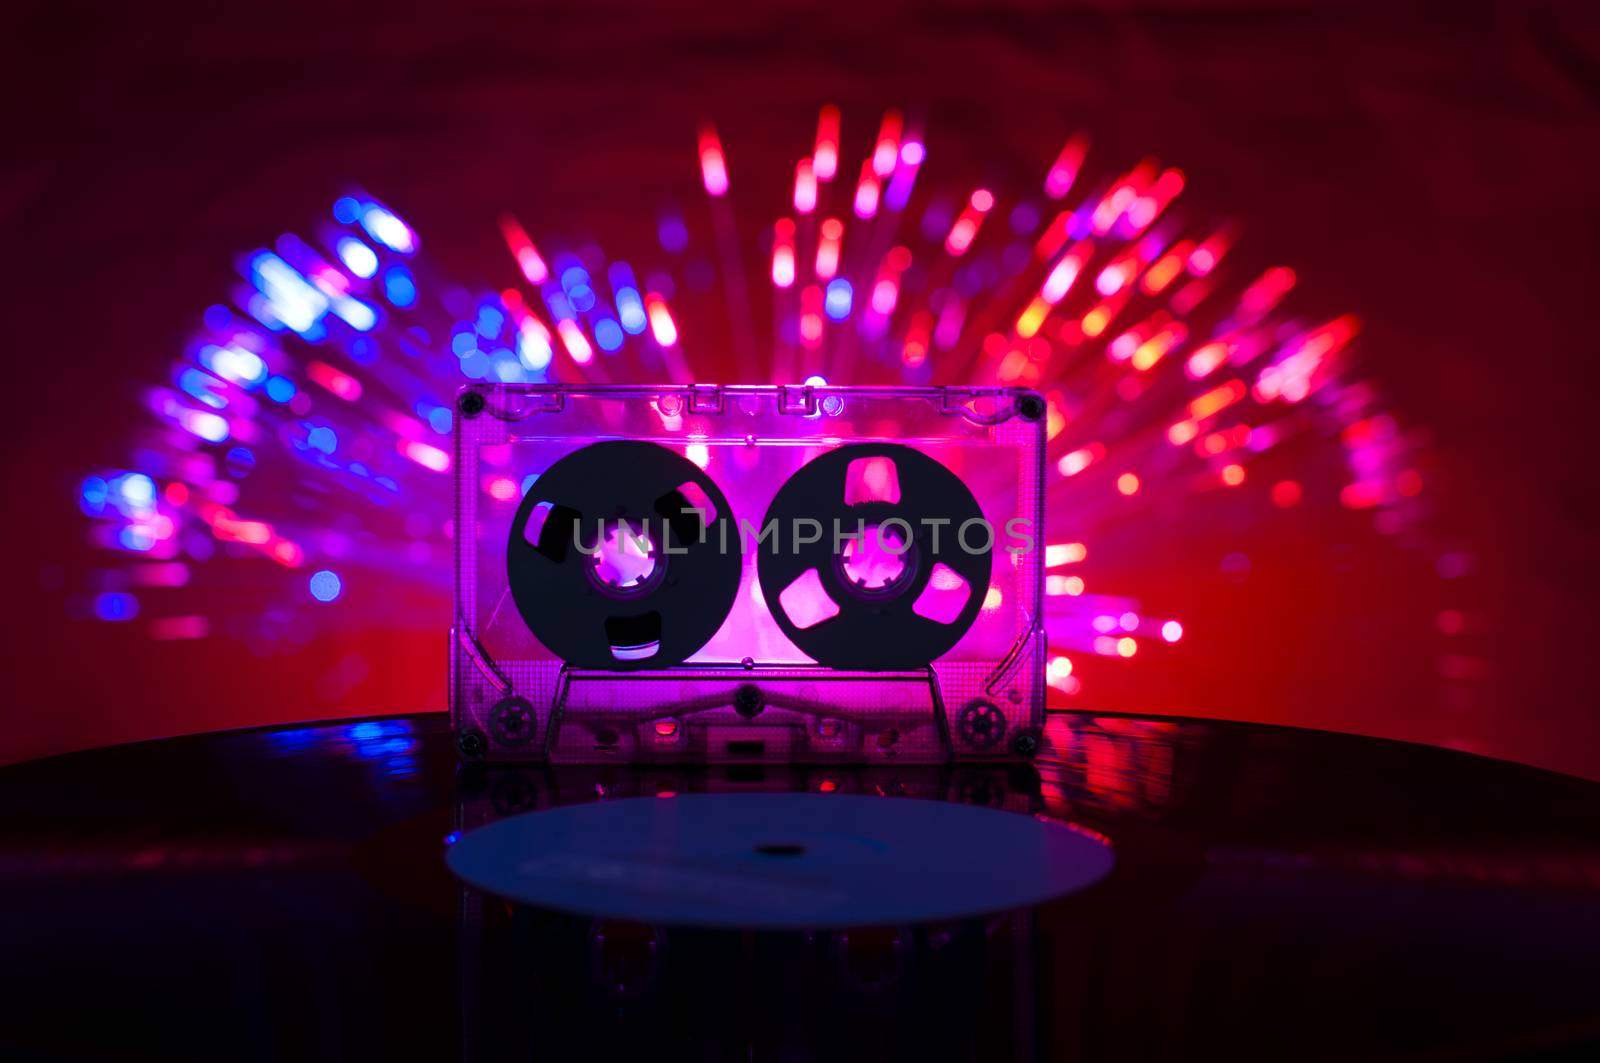 LP vinyl record, cassette tape and disco lights on background